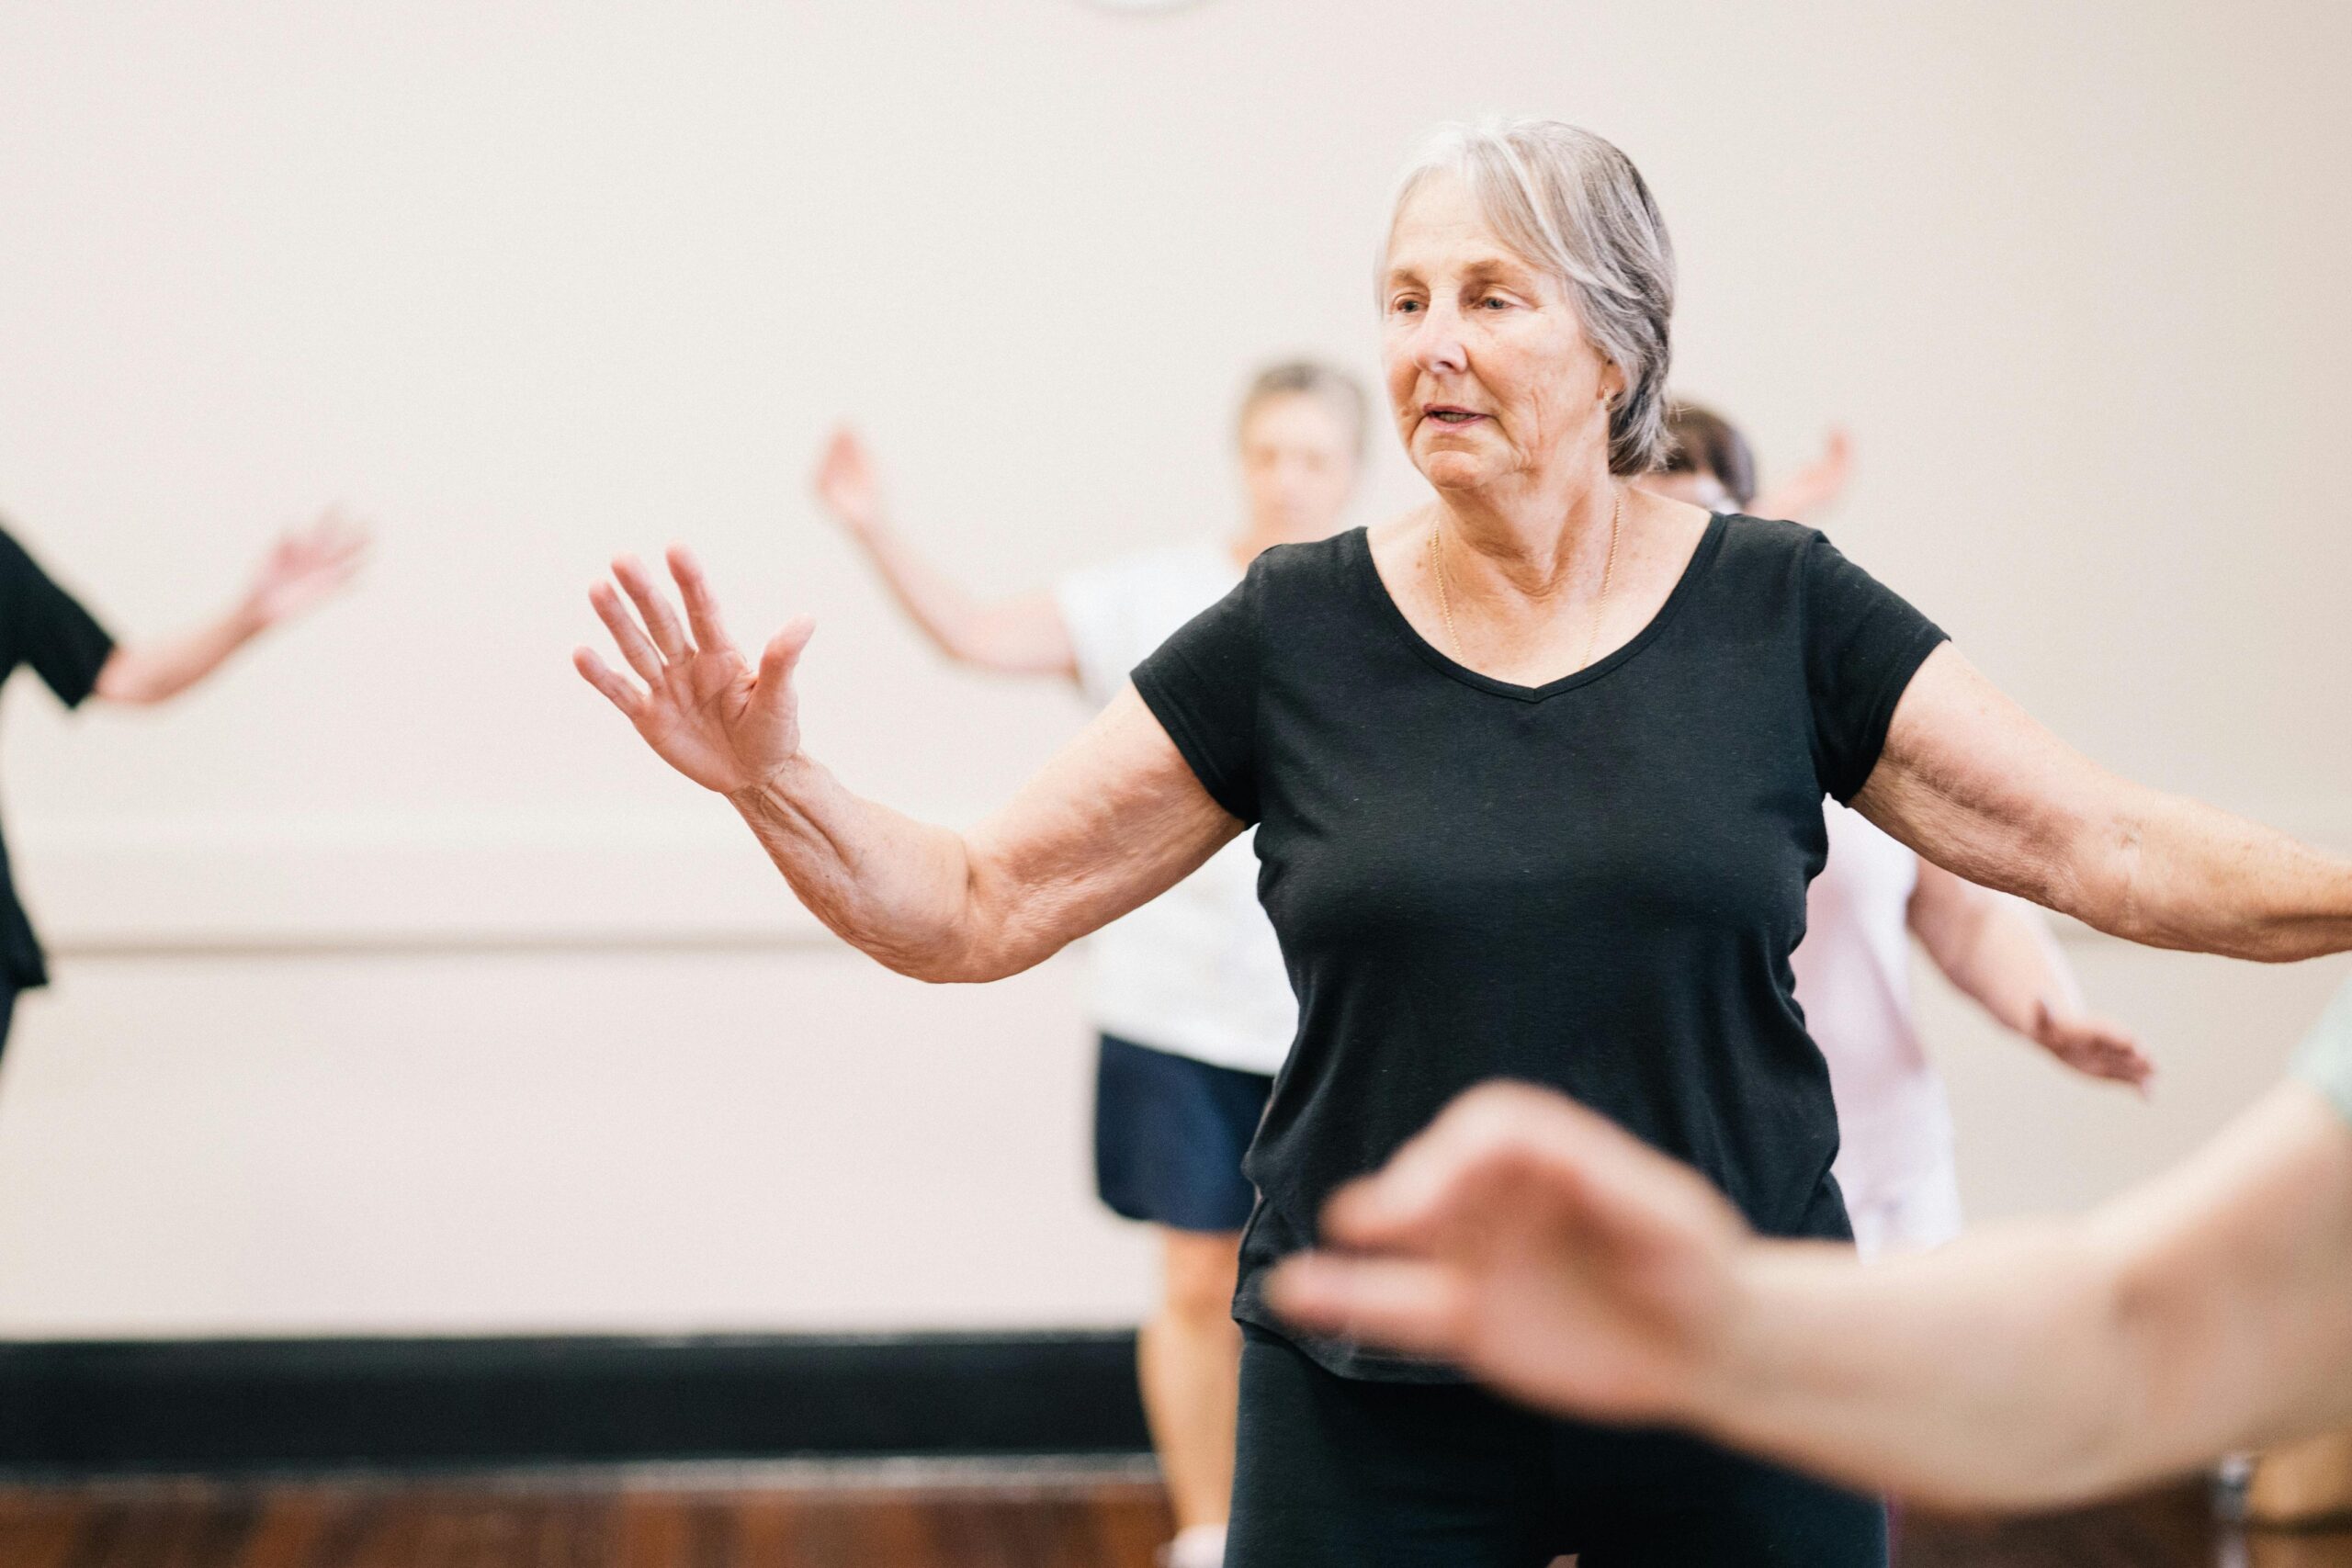 Exercise for Older Adults - Staying Healthy